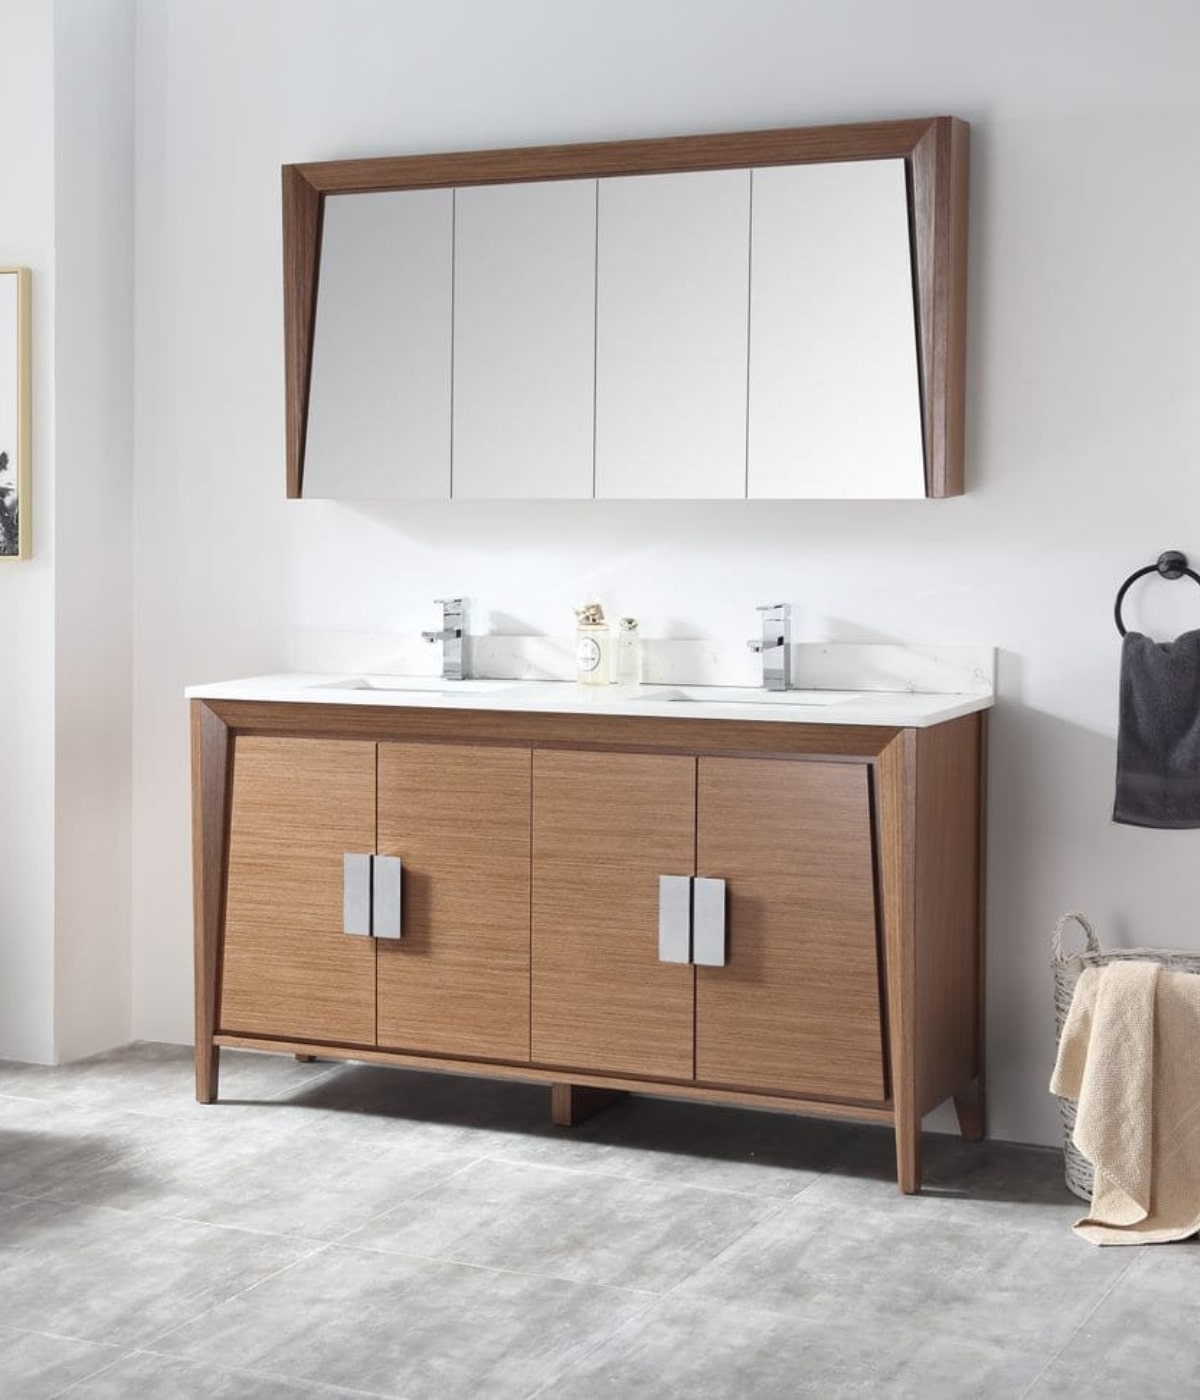 The modern bathroom vanity known as larvotto is solid birch wood. 